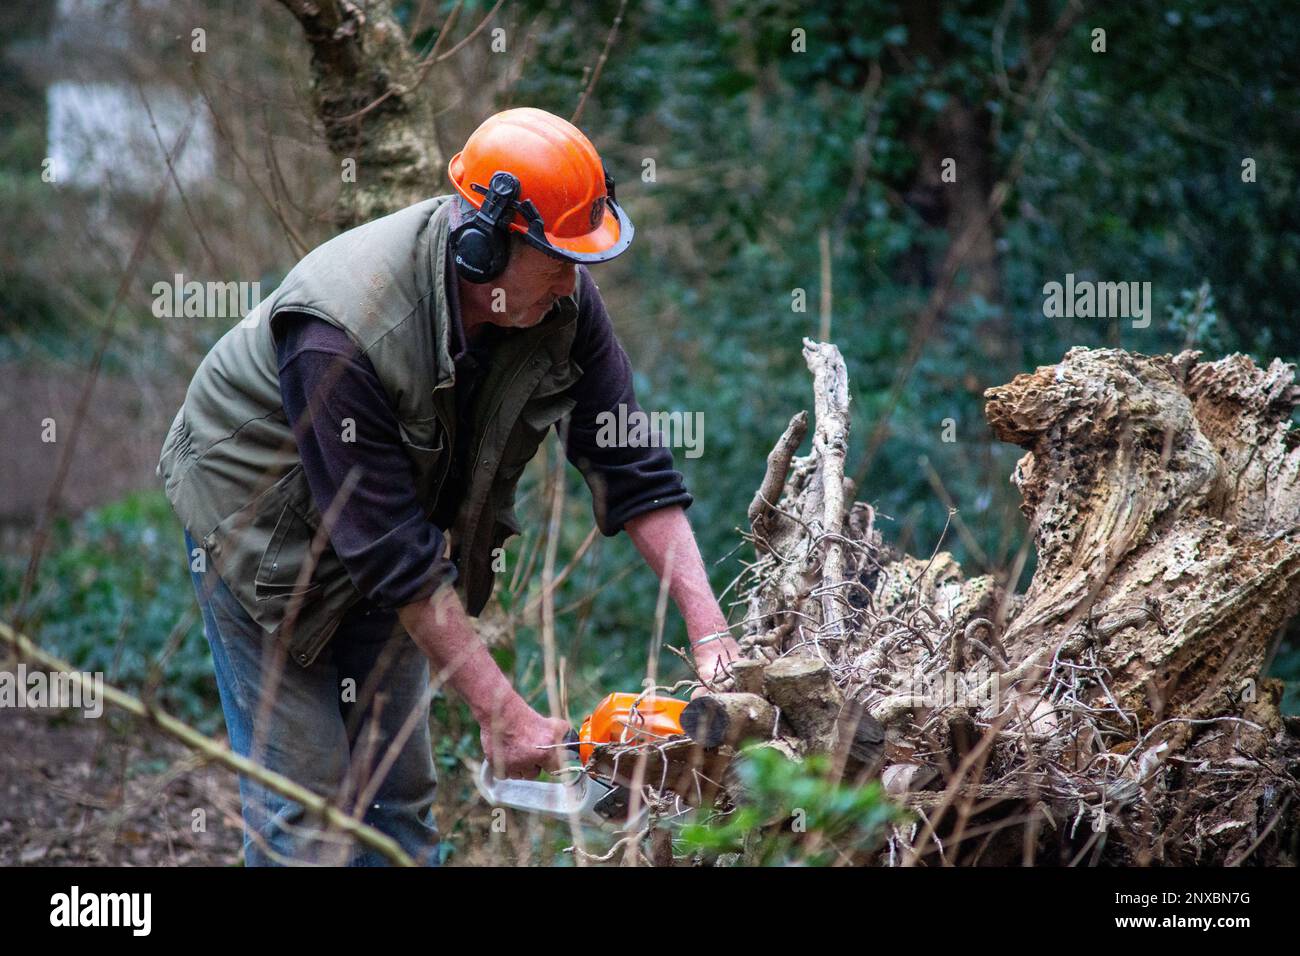 London, UK. 1st Mar, 2021. Shire Horse helps clear Chiswick's Wilderness. London, UK. Six year-old rescued Shire Horse gelding William, 17hh, helps Tom Nixon of Operation Centaur clear fallen or dead trees from The WIlderness in the grounds of Chiswick House. Credit: Peter Hogan/Alamy Live News Stock Photo